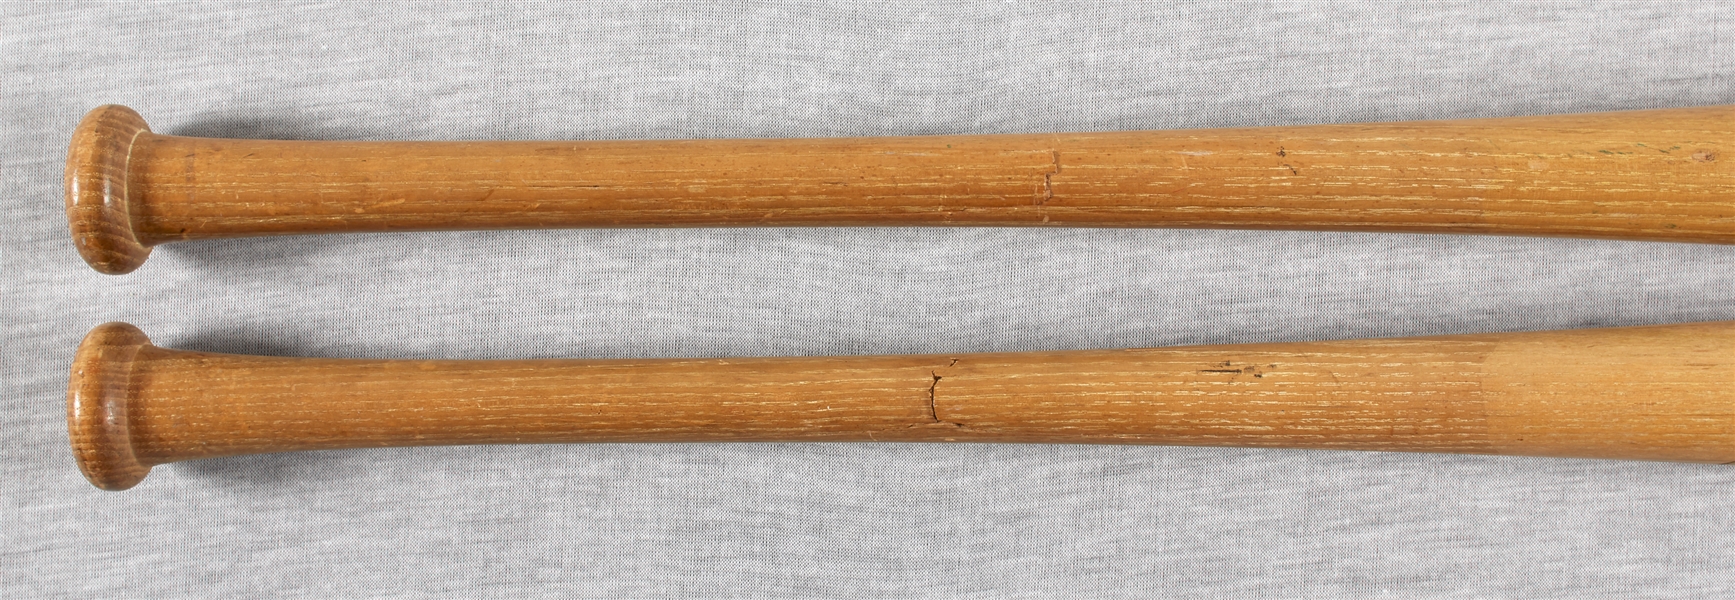 Hal Smith Game-Used H&B Bats Pair (2)